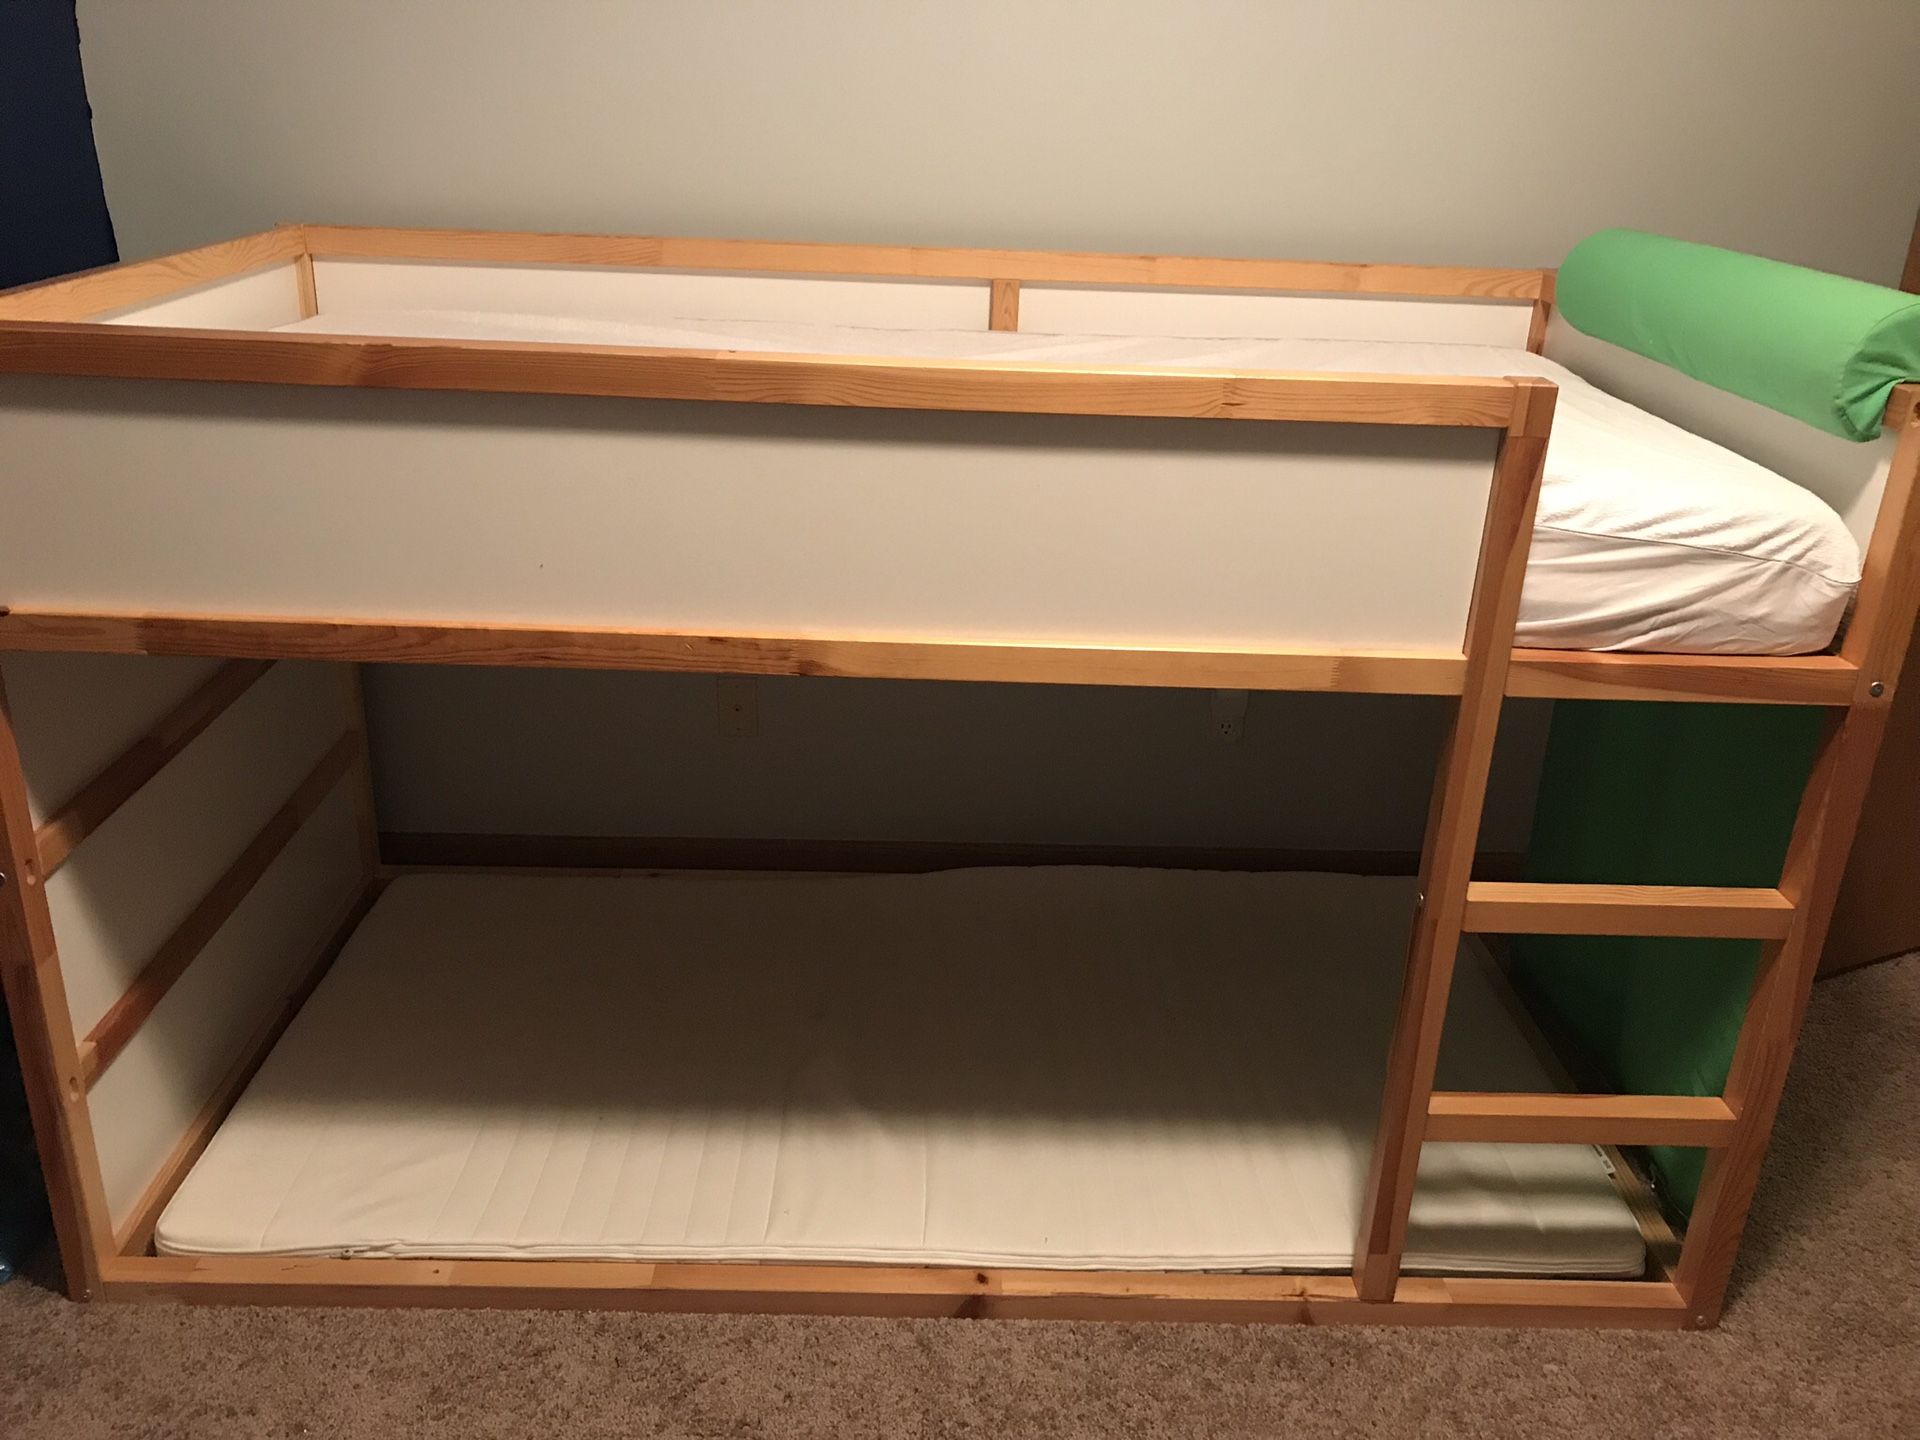 Modern kids bunk bed with mattress and accessories